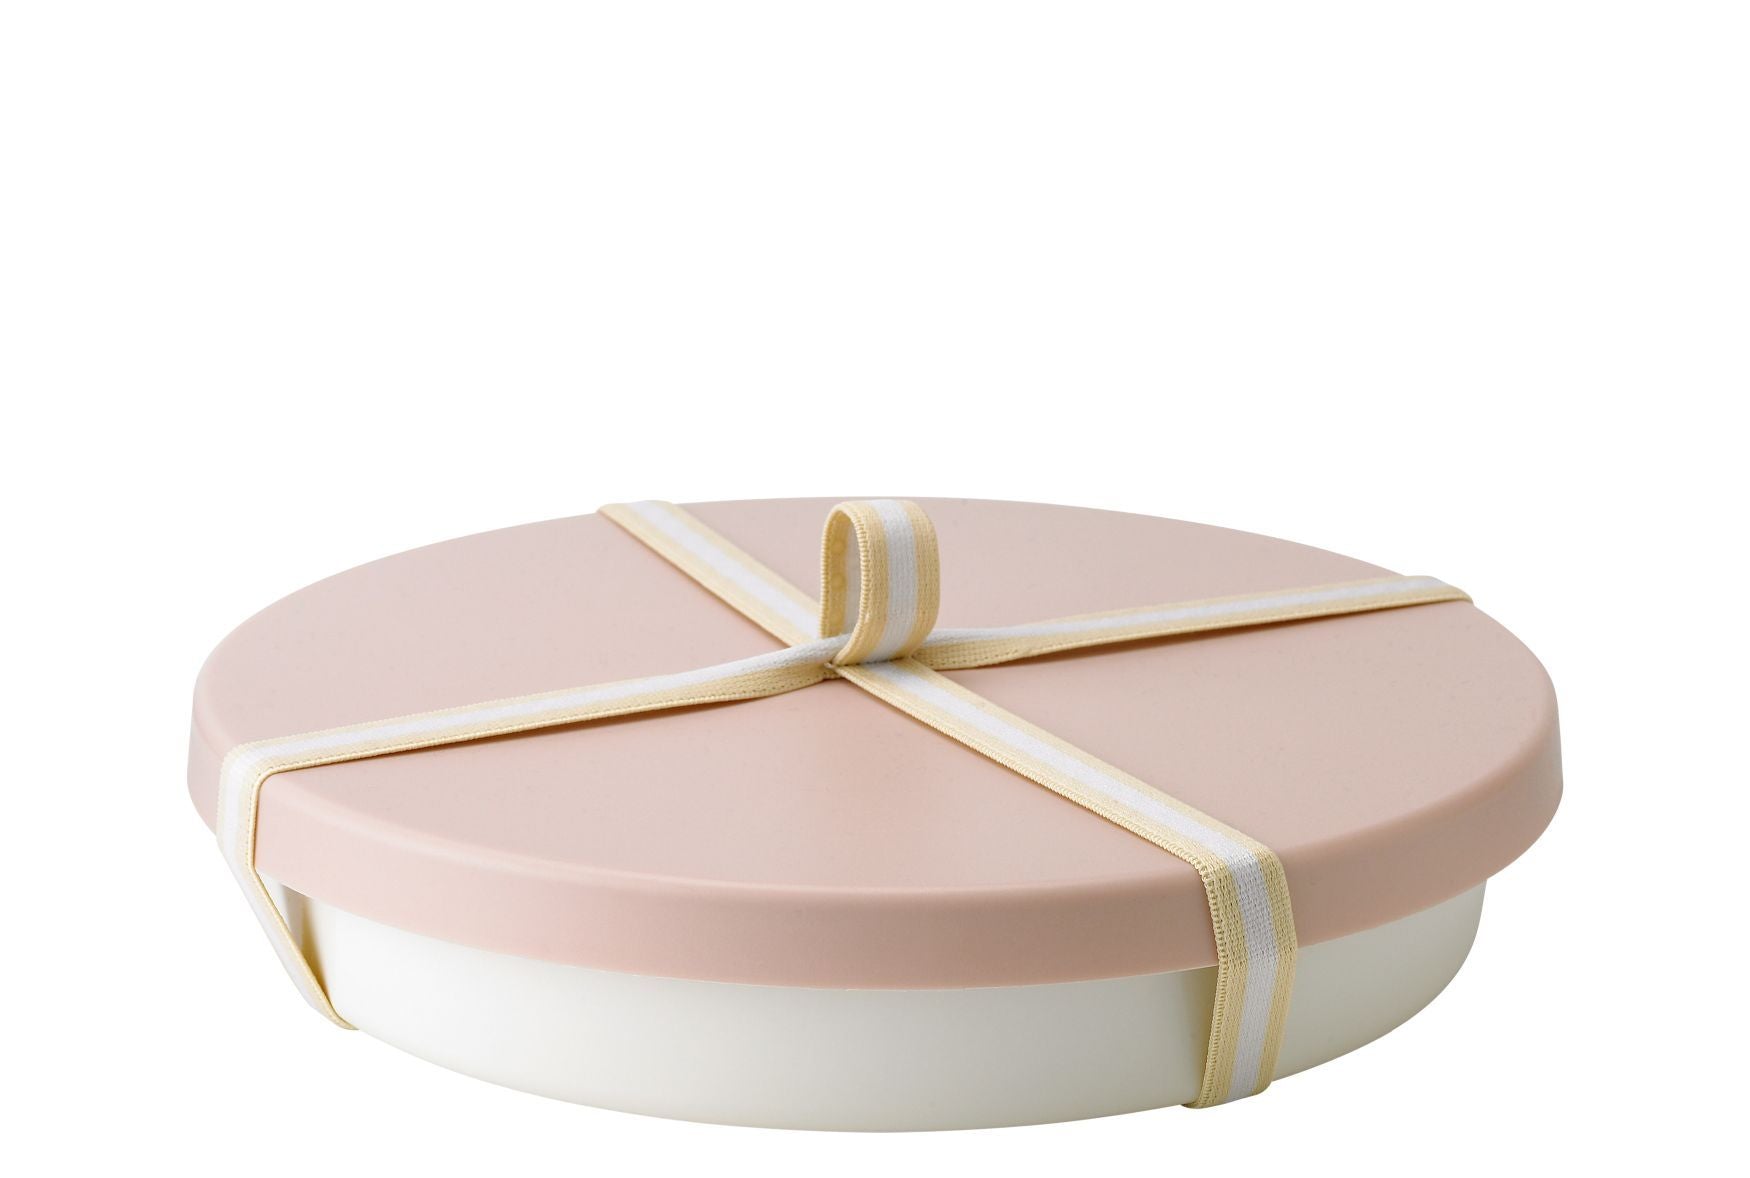 Picnic baking dish with lid Ø 25 cm RIG TIG by Stelton